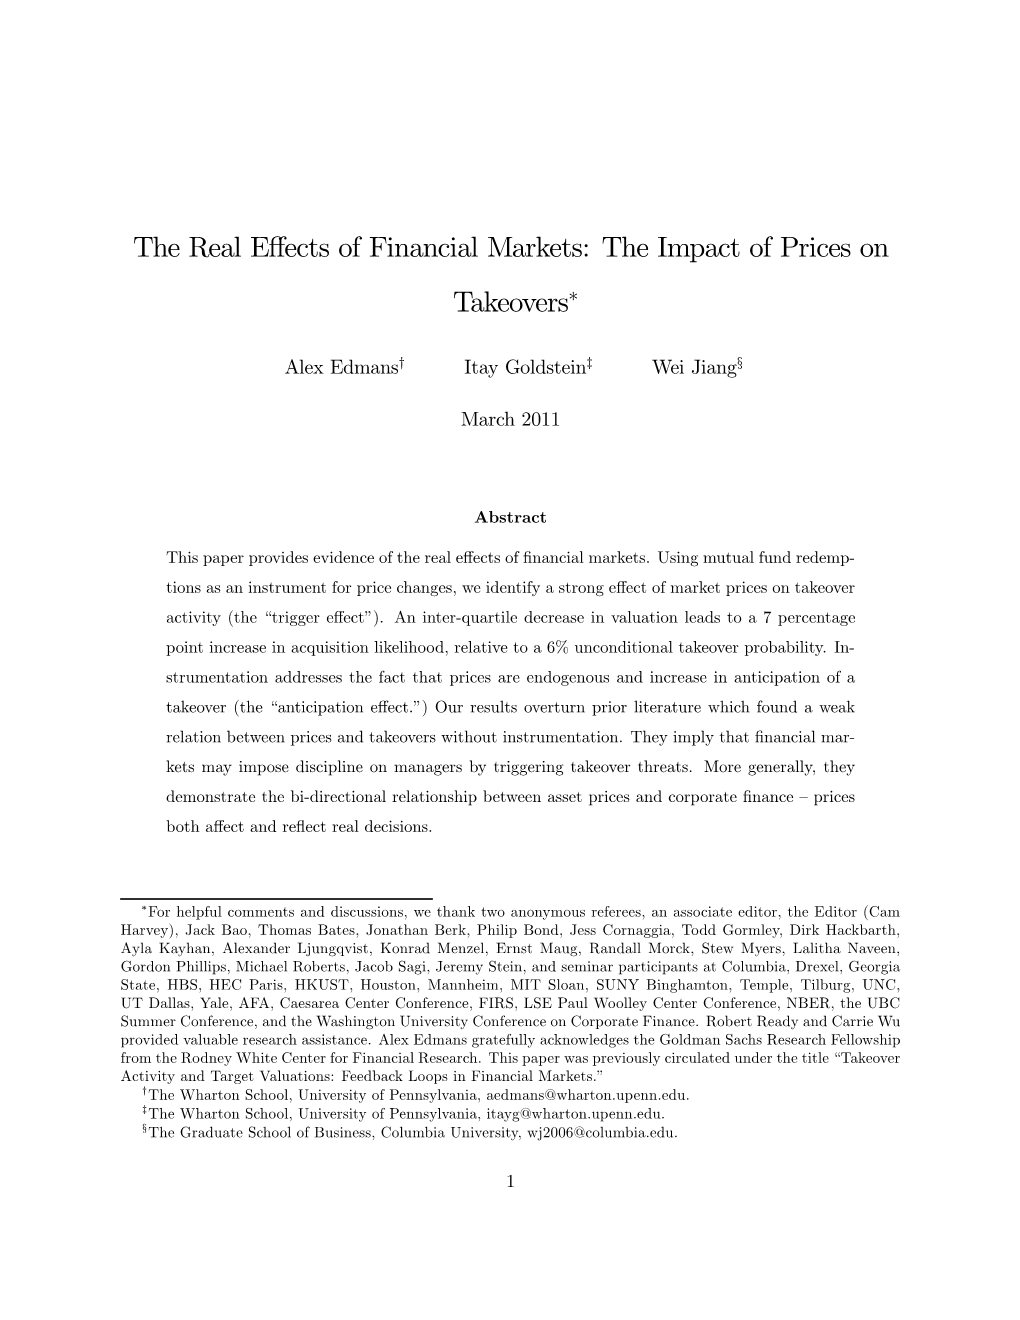 The Real Effects of Financial Markets: the Impact of Prices on Takeovers∗